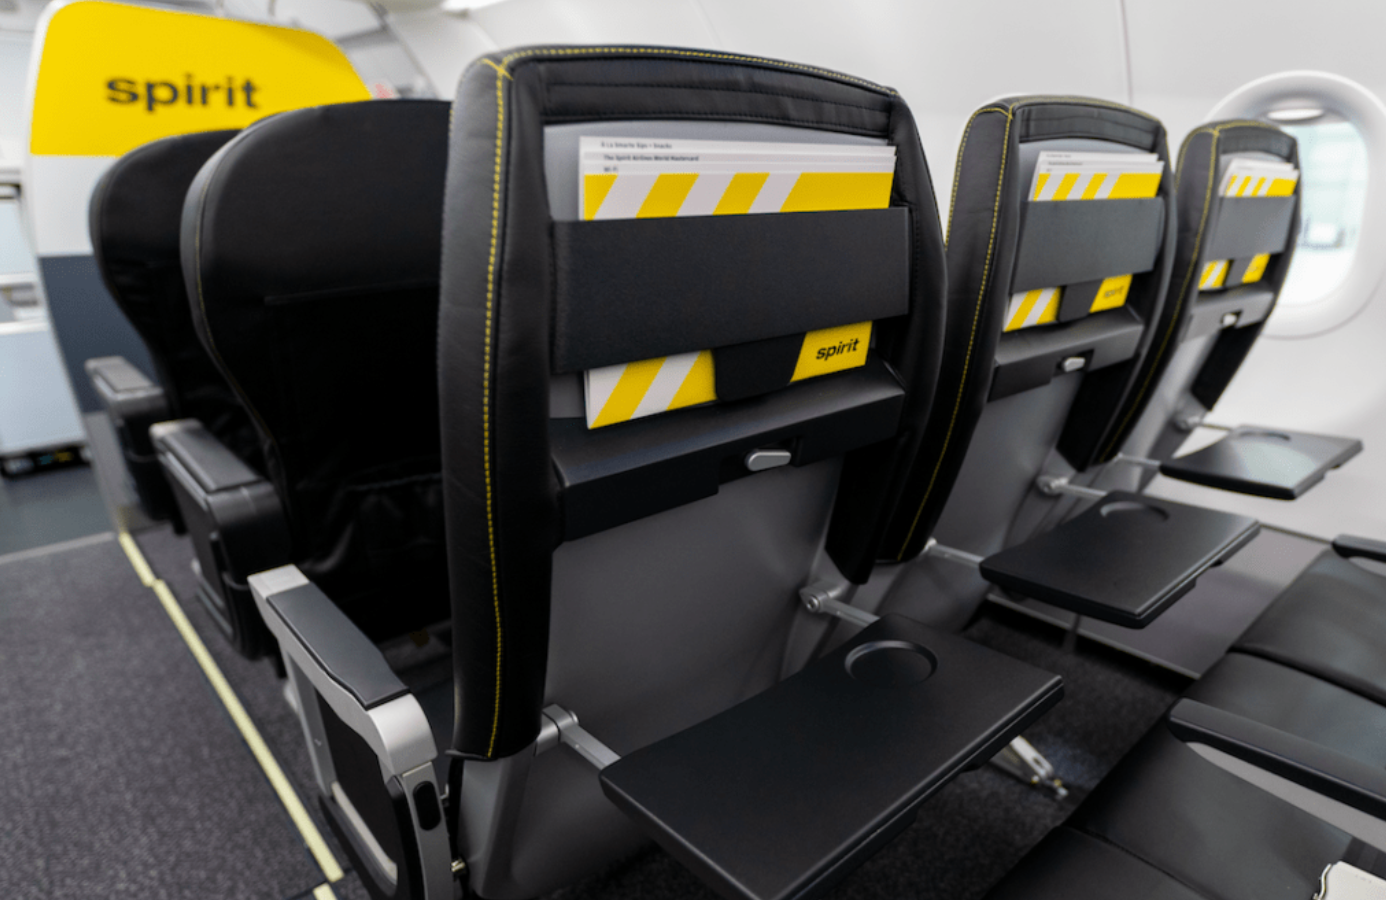 Inside the cabin of a Spirit Airlines aircraft.